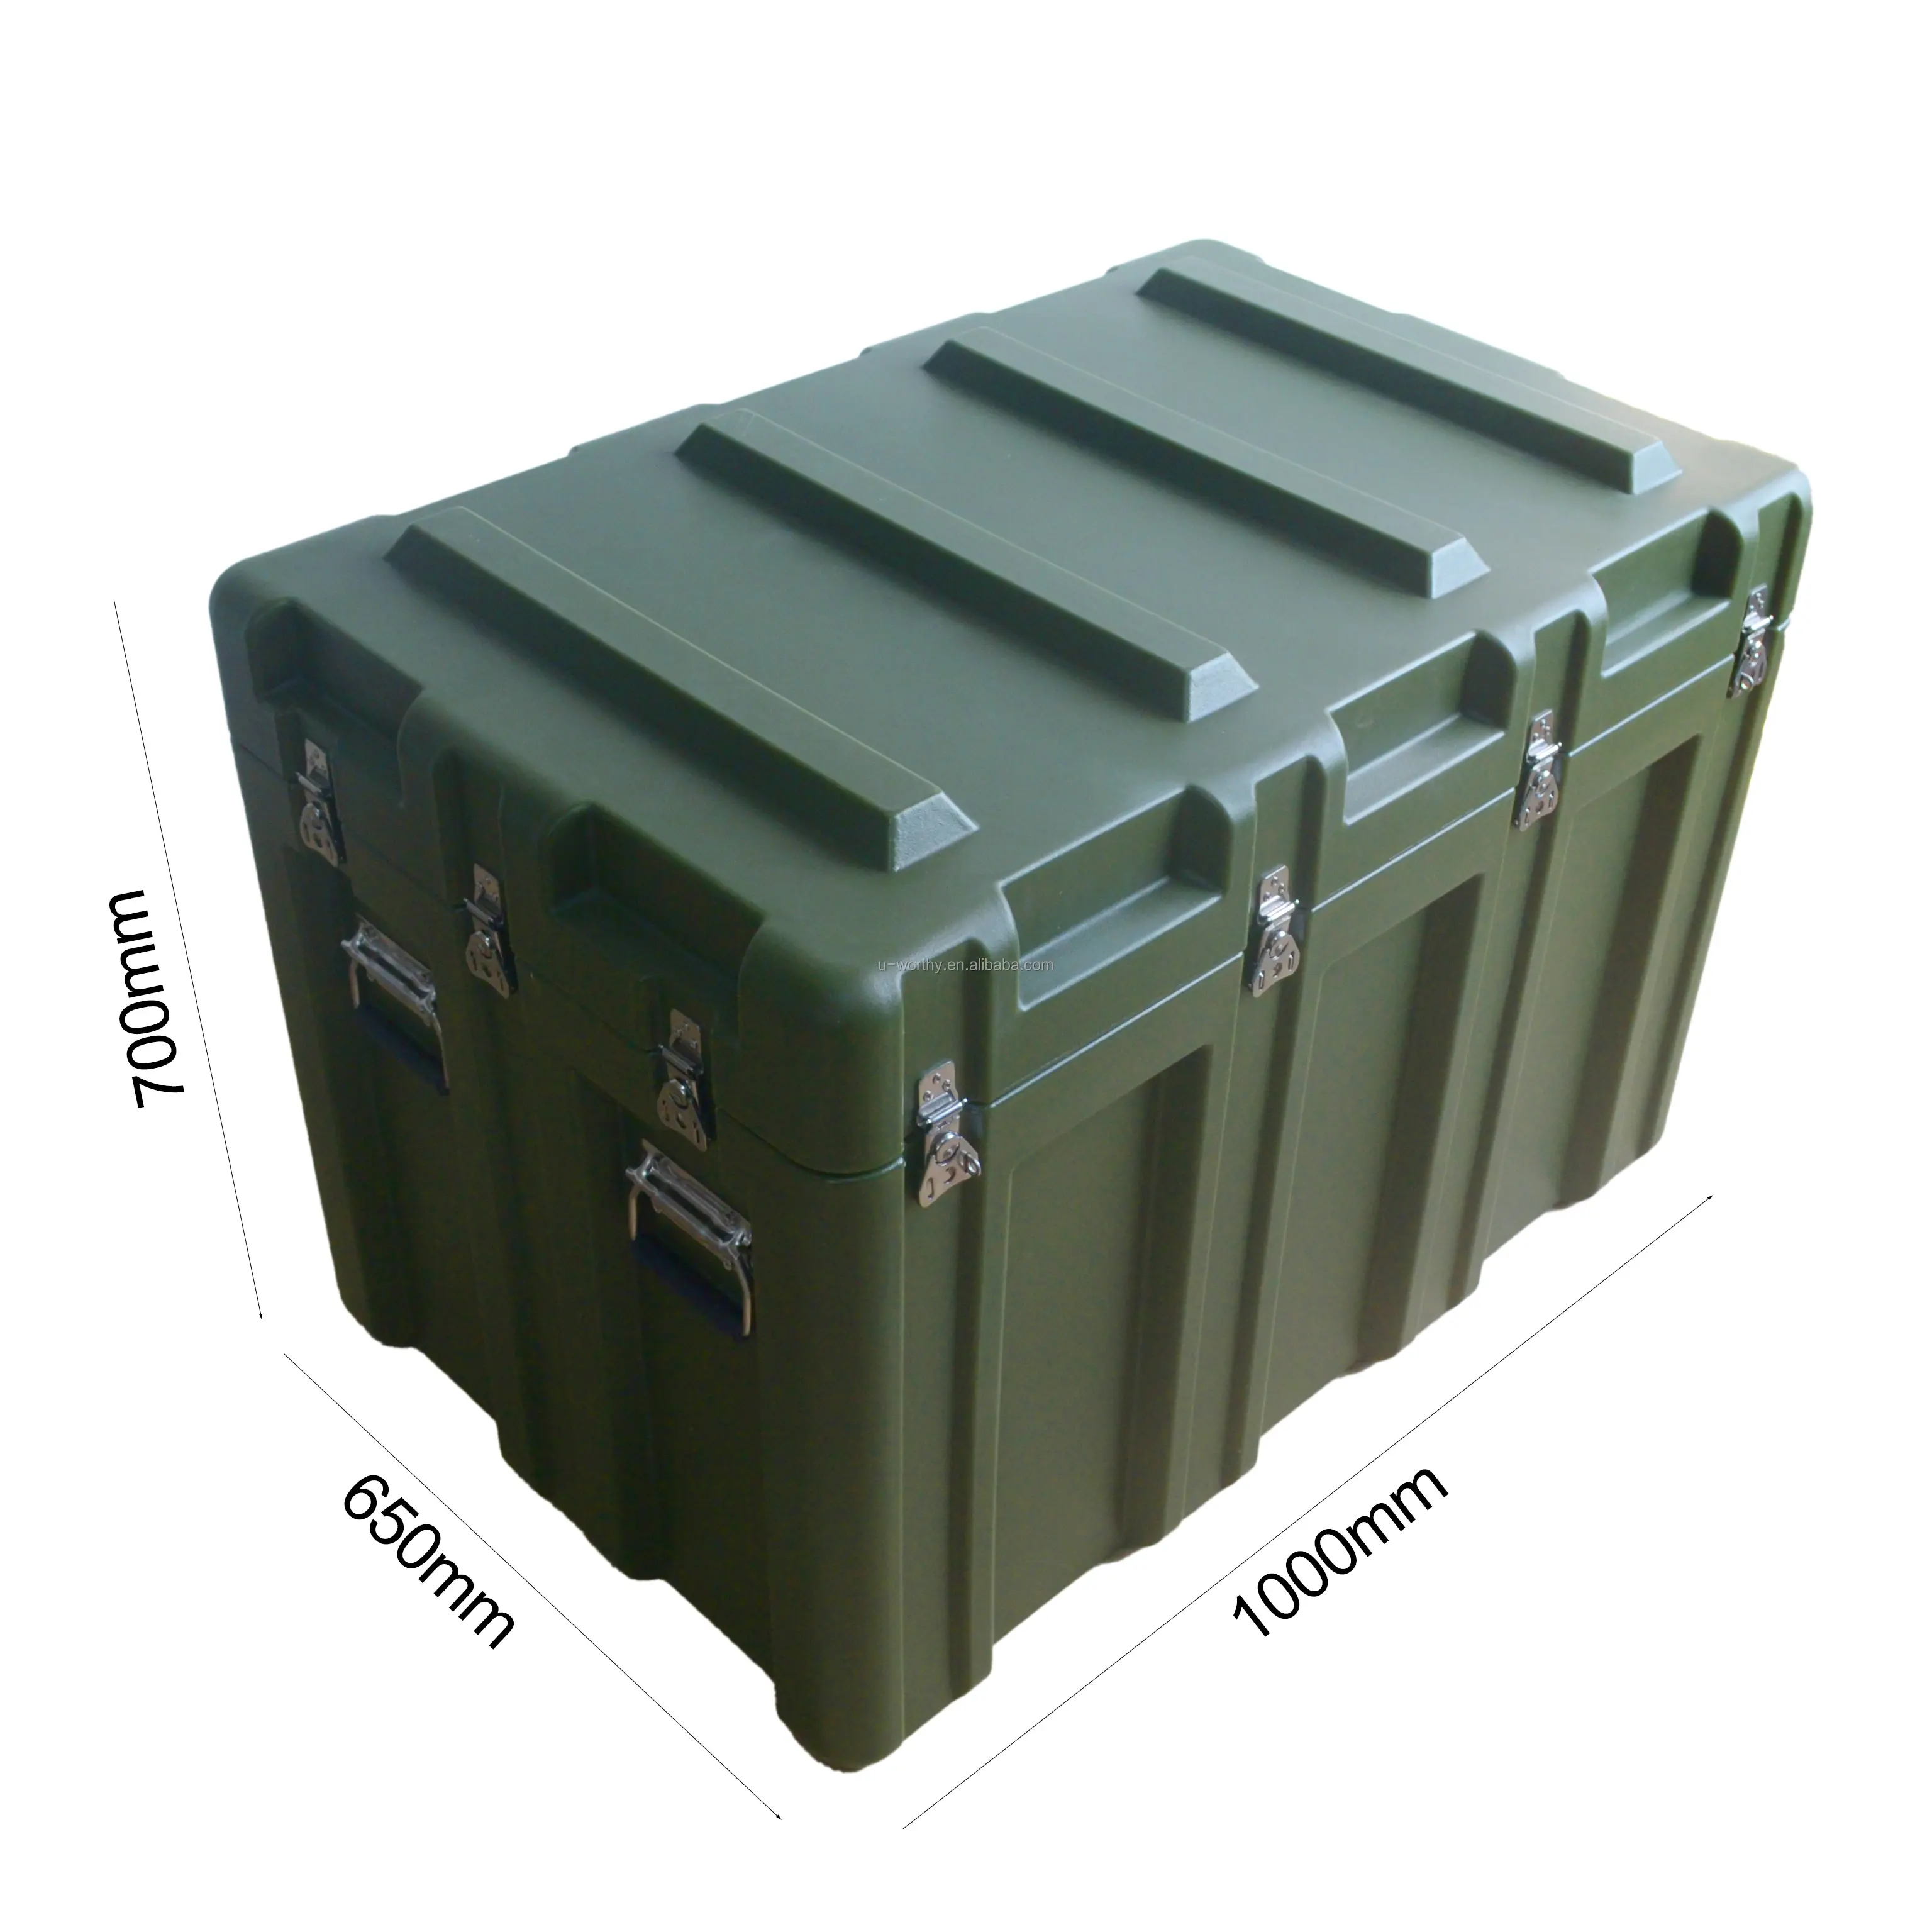 Ningbo Factory Direct High Quality PE Plastic Material Hard Roto-molded Cargo Case for Equipment Transport Case with Large Size